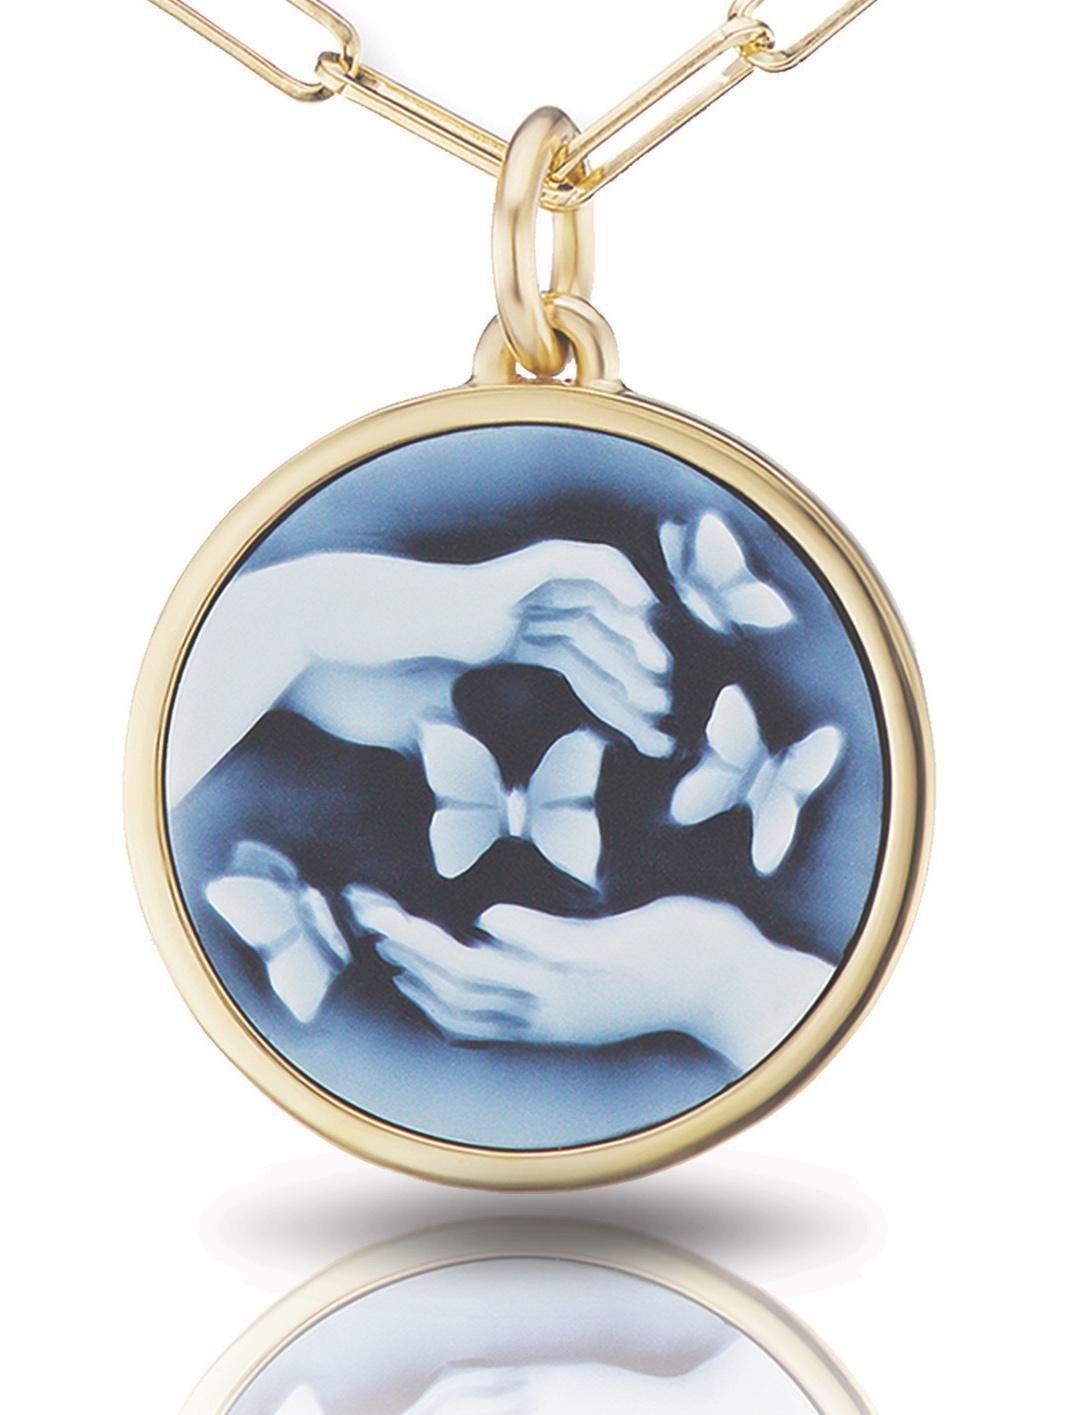 Contemporary AnaKatarina 'Ludus' Love Token, Hand Carved Agate Cameo and 18 Karat Yellow Gold For Sale